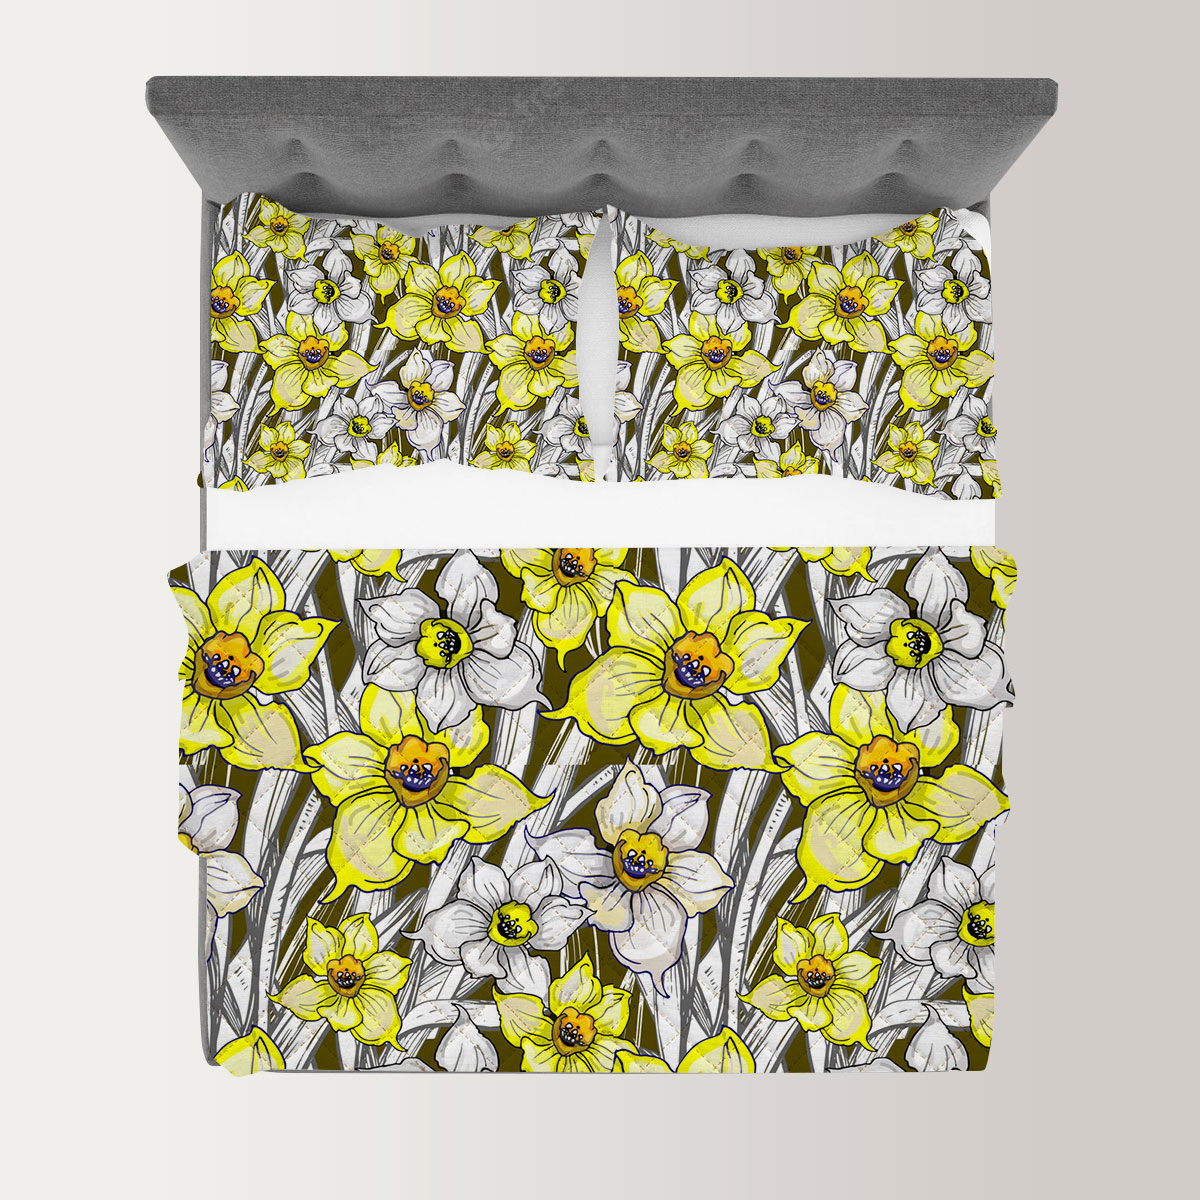 Botanical With Flowers Of Narcissus Daffodil Quilt Set